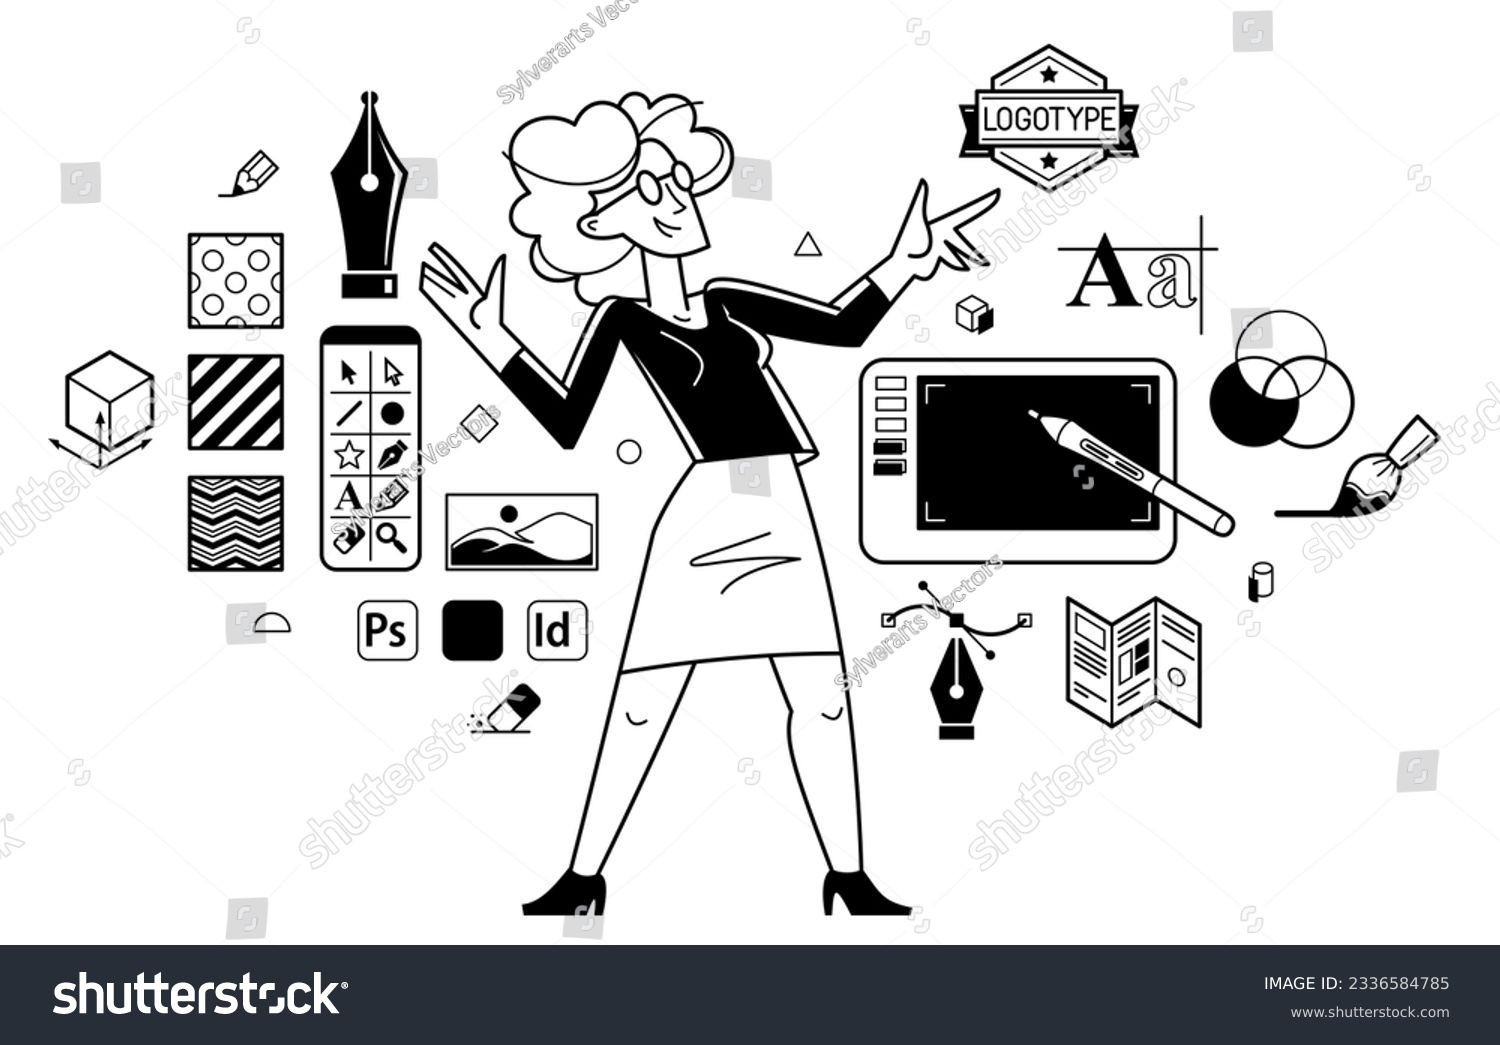 Graphic designer doing some creative job using computer software, digital visual artist working on a project vector outline illustration, composing and editing. #2336584785